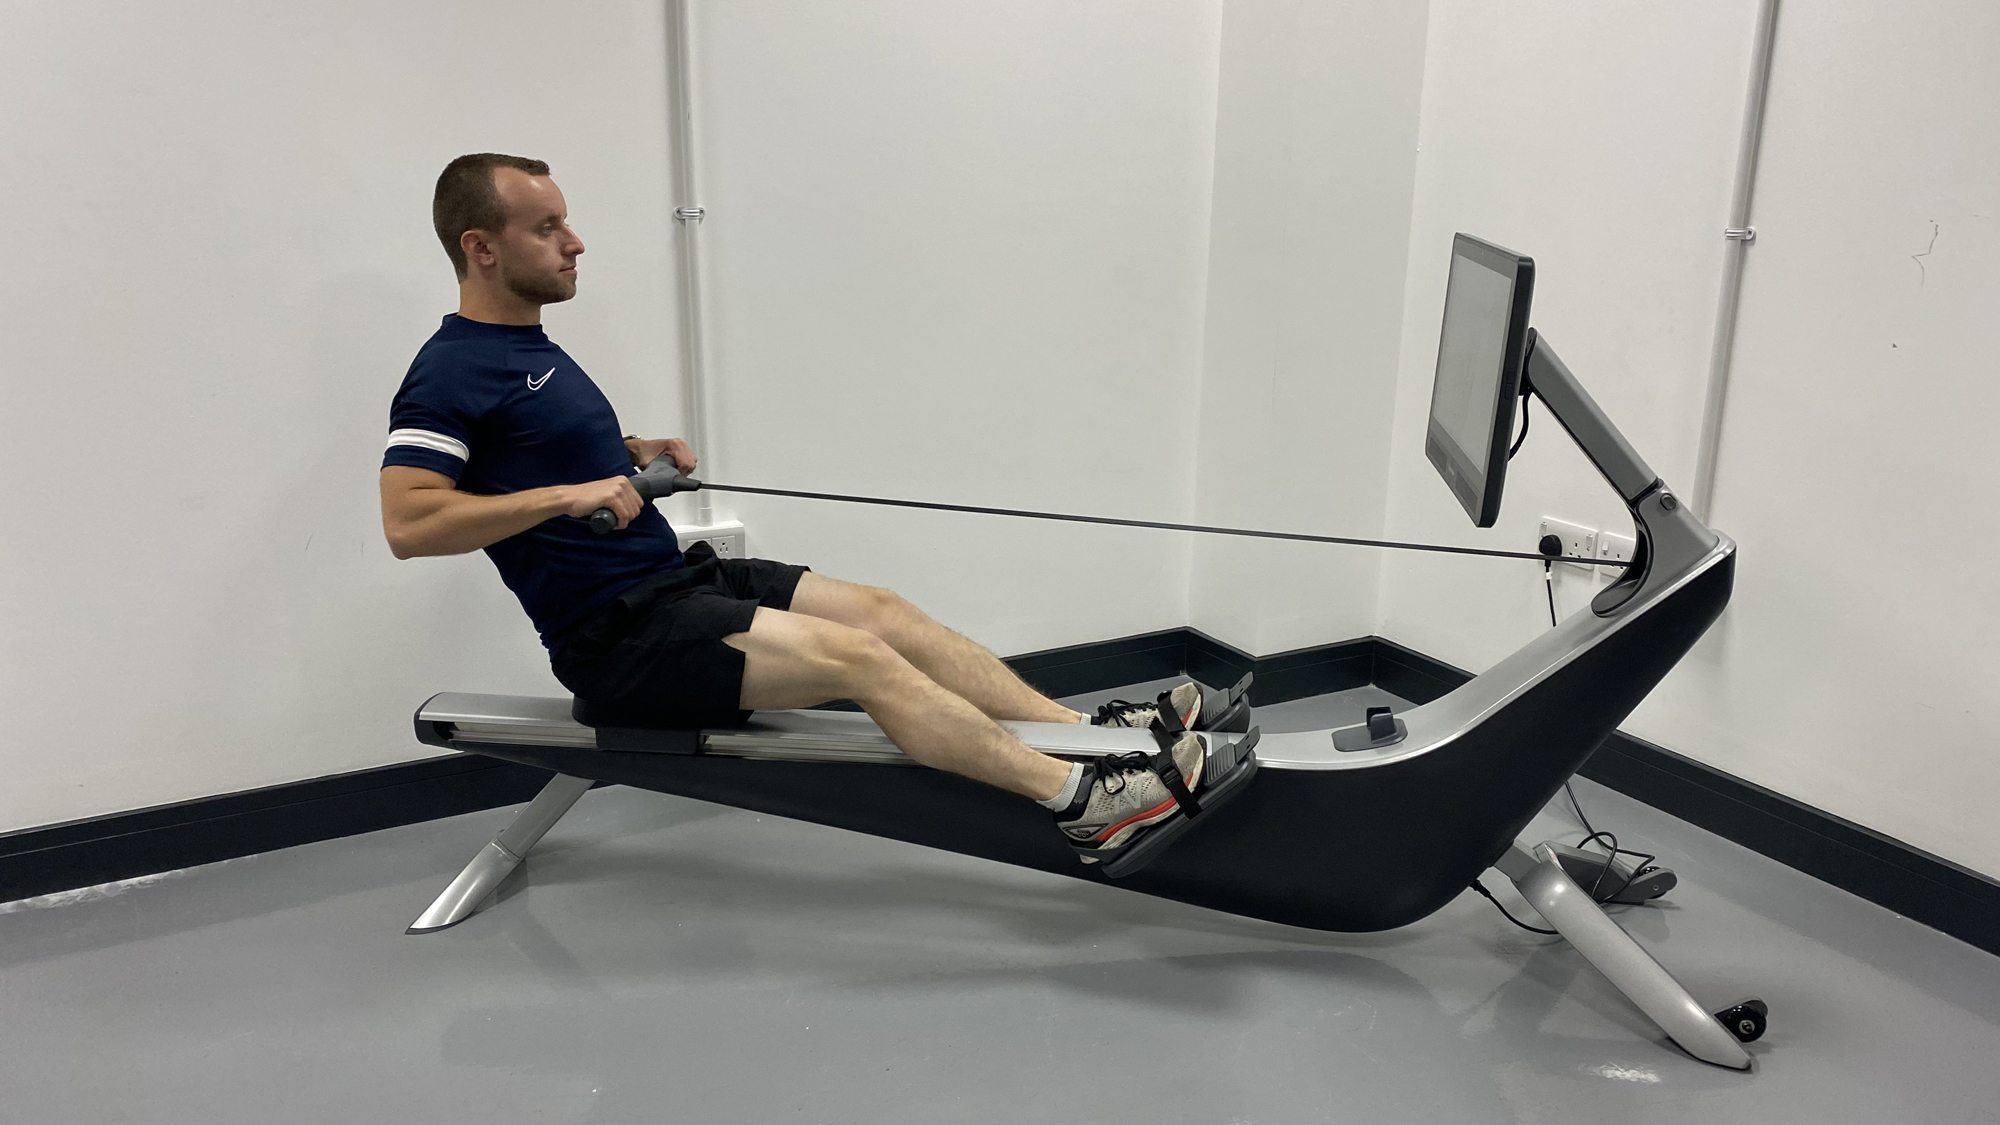 The Hydrow Connected Rower made me actually enjoy rowing—heres why FitandWell